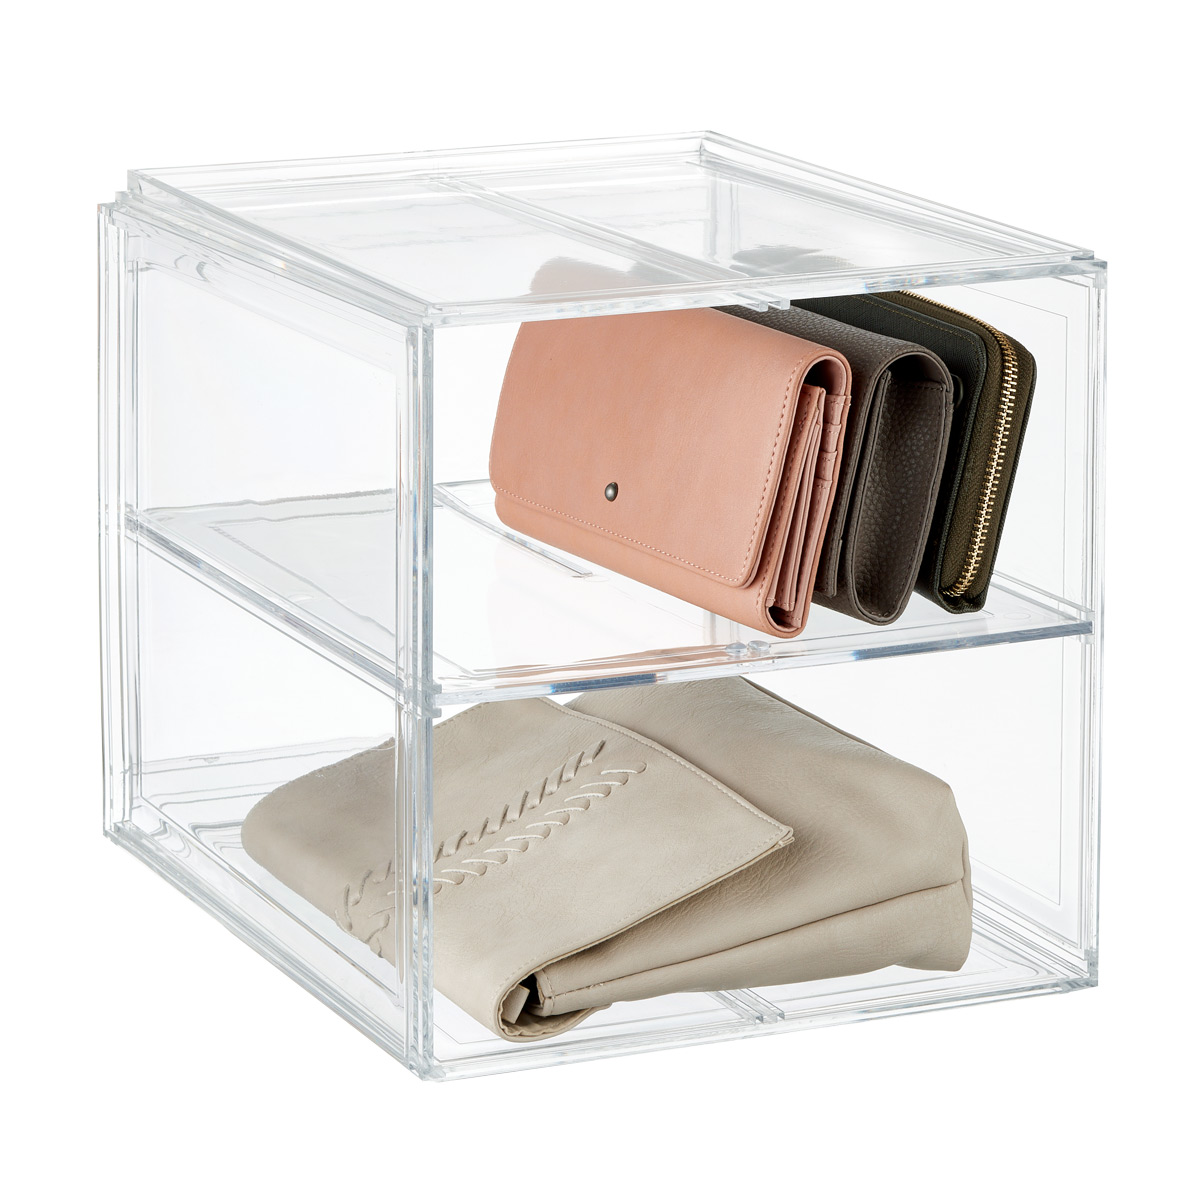 https://www.containerstore.com/catalogimages/446245/10088850_Divided_Handbag_Cube_Clear_.jpg